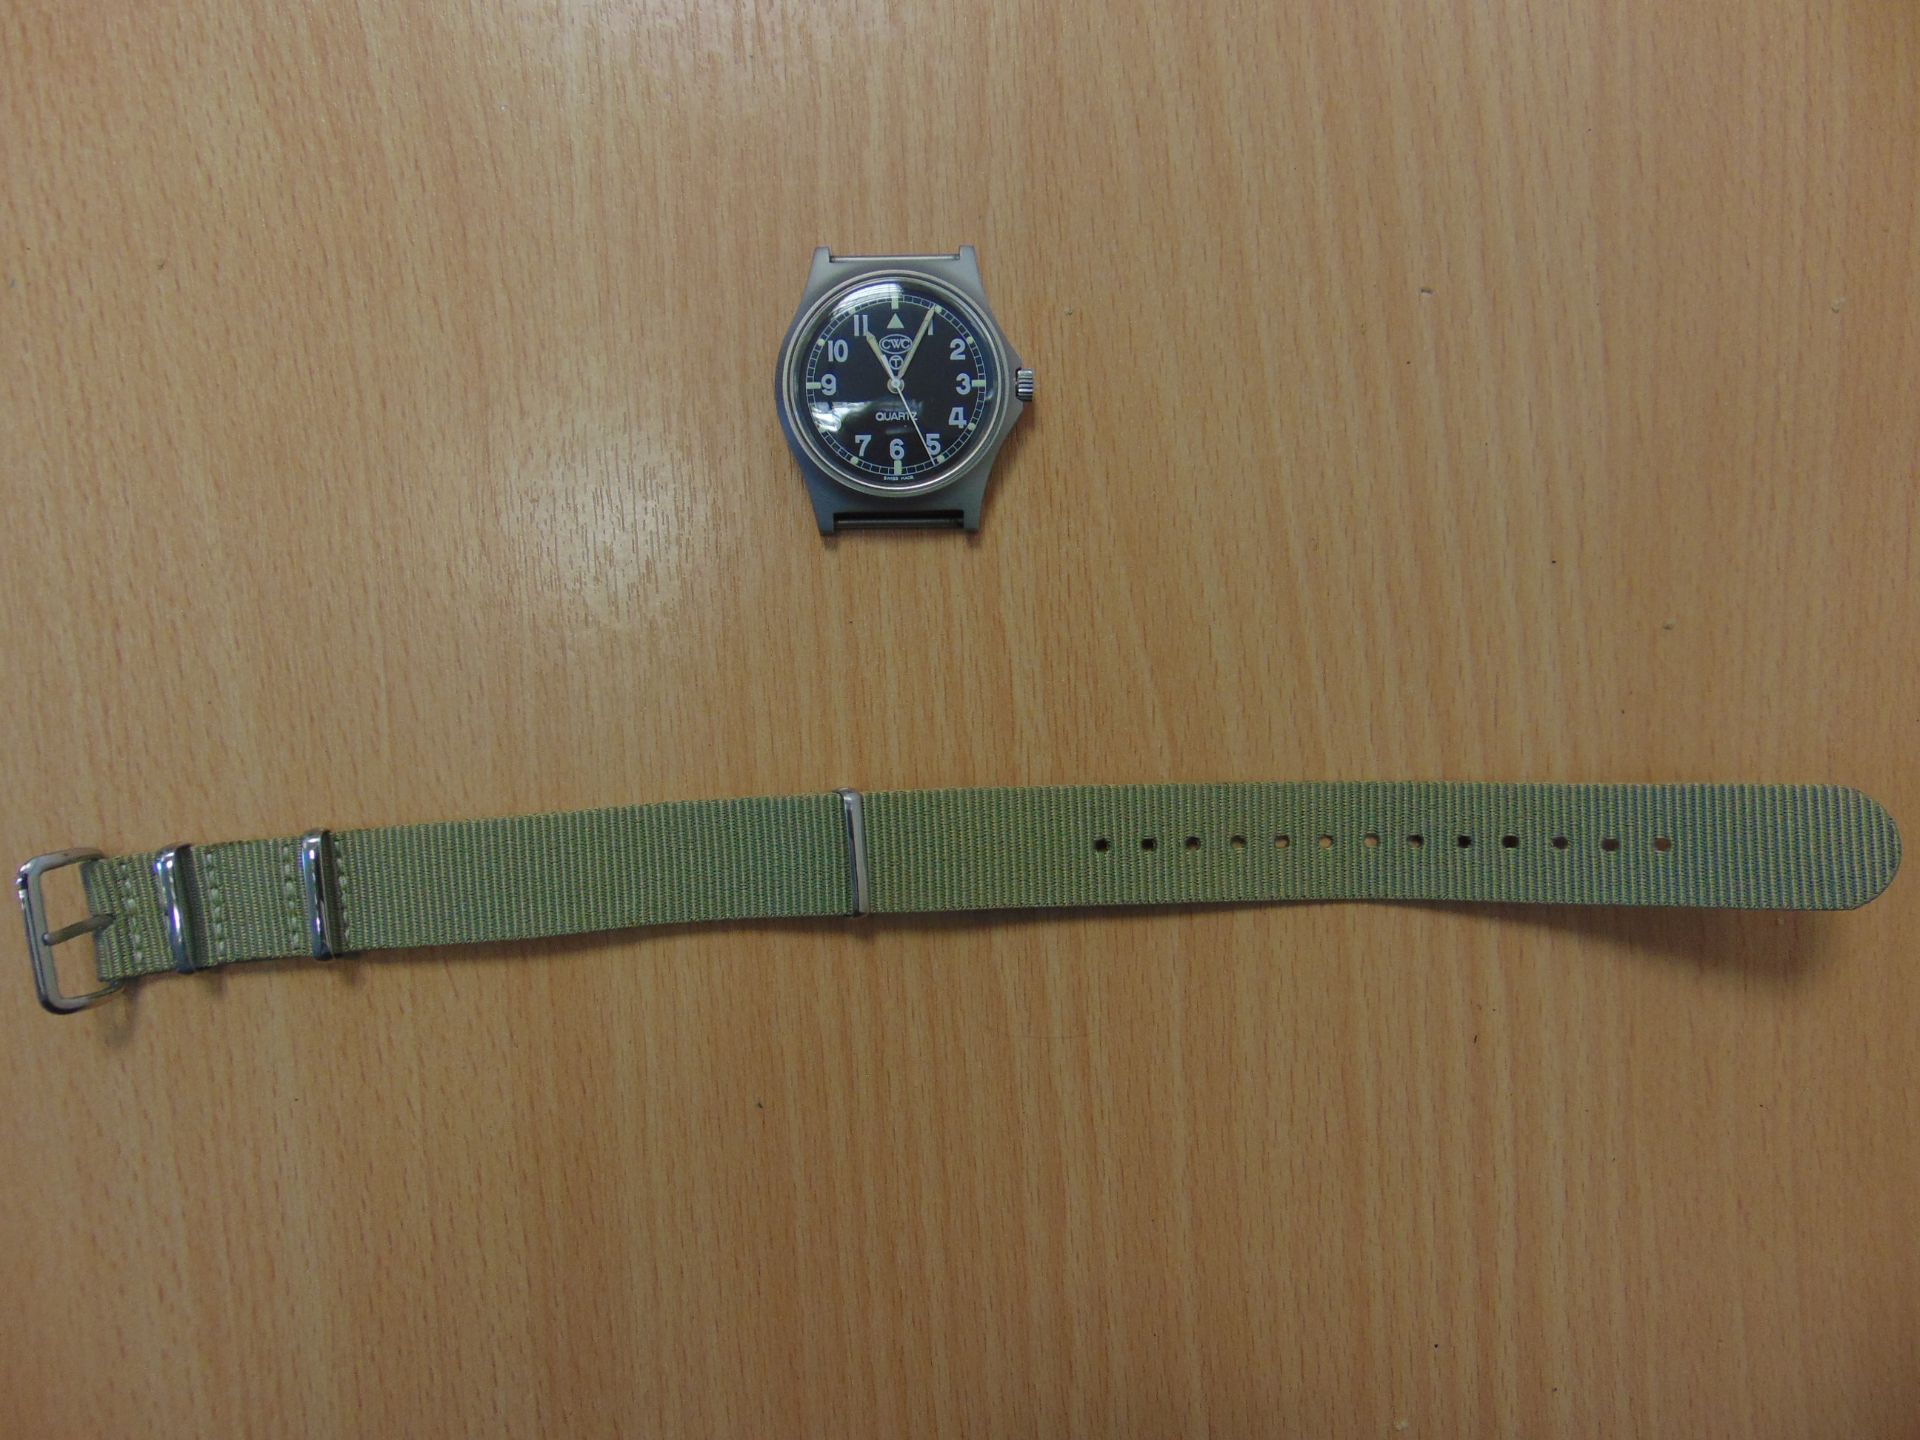 SUPERB RARE CWC W10 SERVICE WATCH UNISSUED NATO MARKED AND DATED 1991 GULF WAR IN ORIGINAL BOX - Image 6 of 7